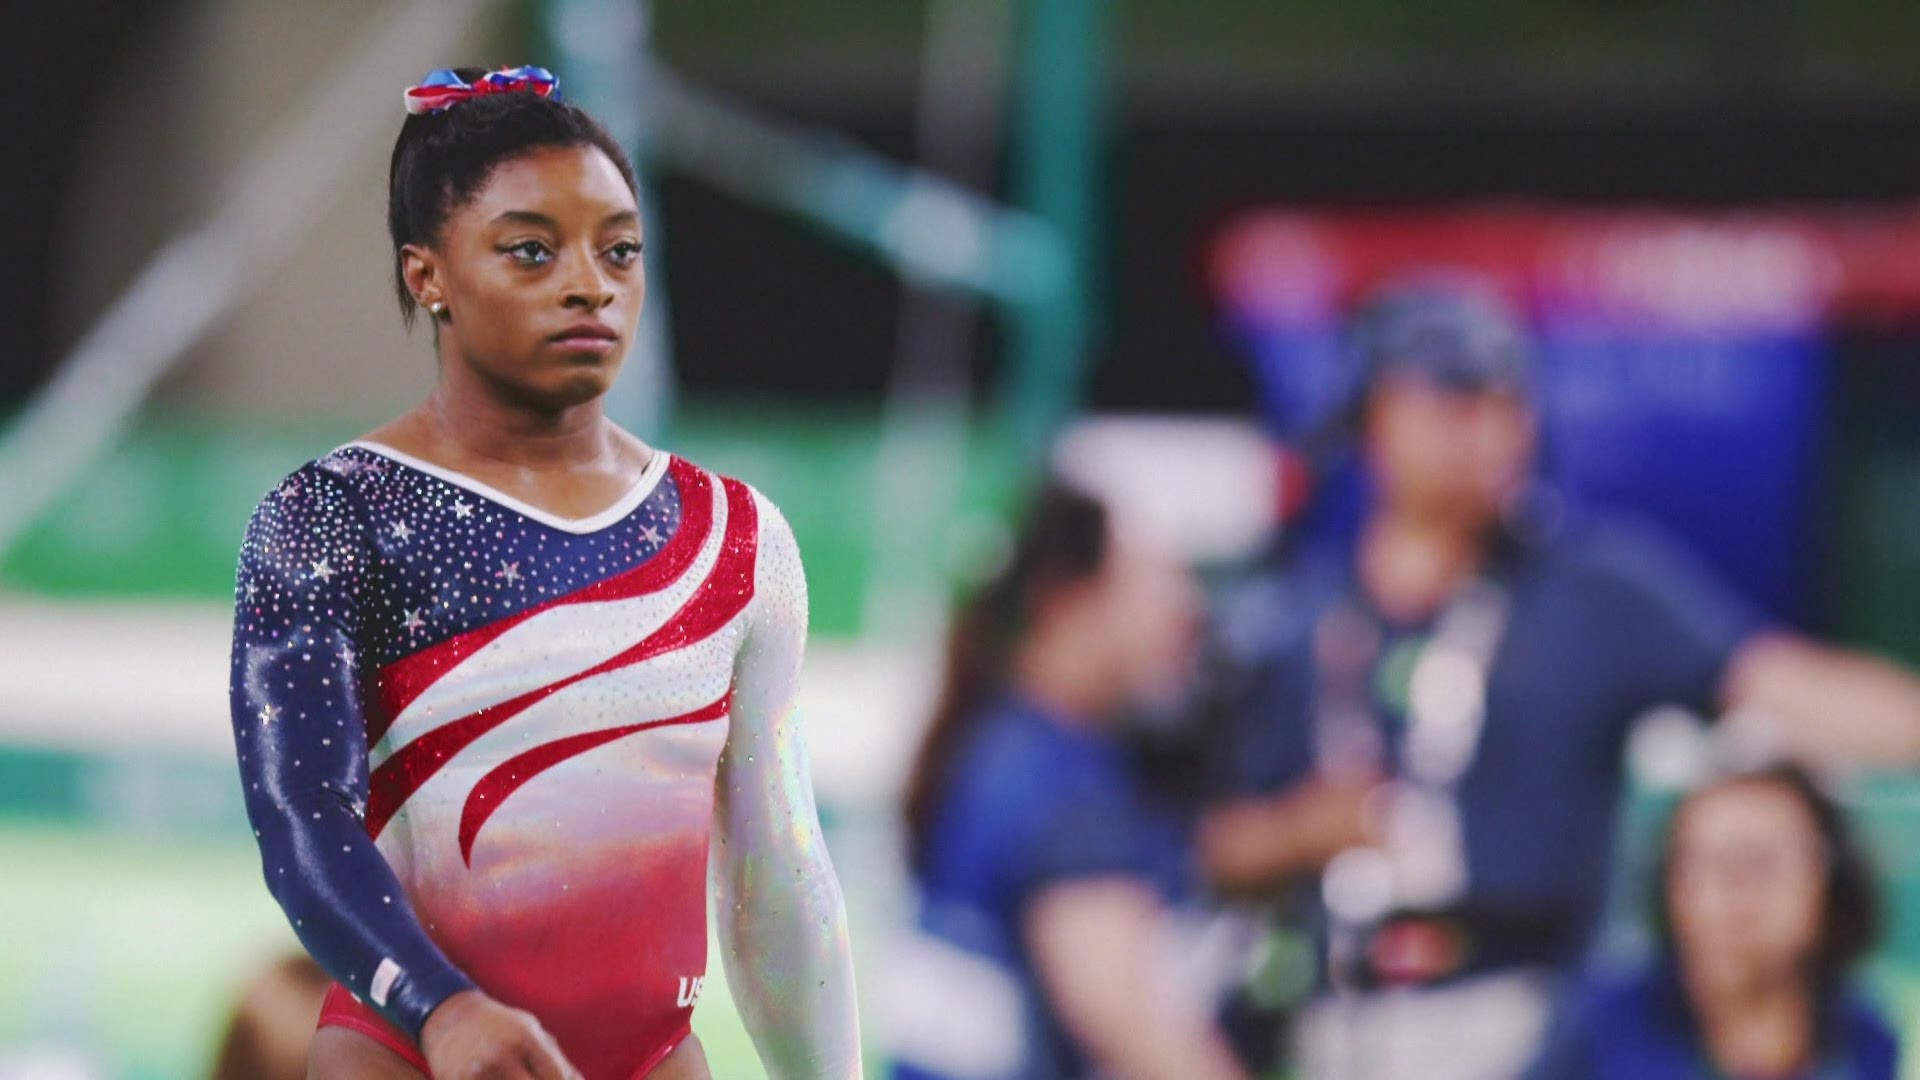 The question is not how much more Simone Biles can do. The question is, how high can she go while doing it?